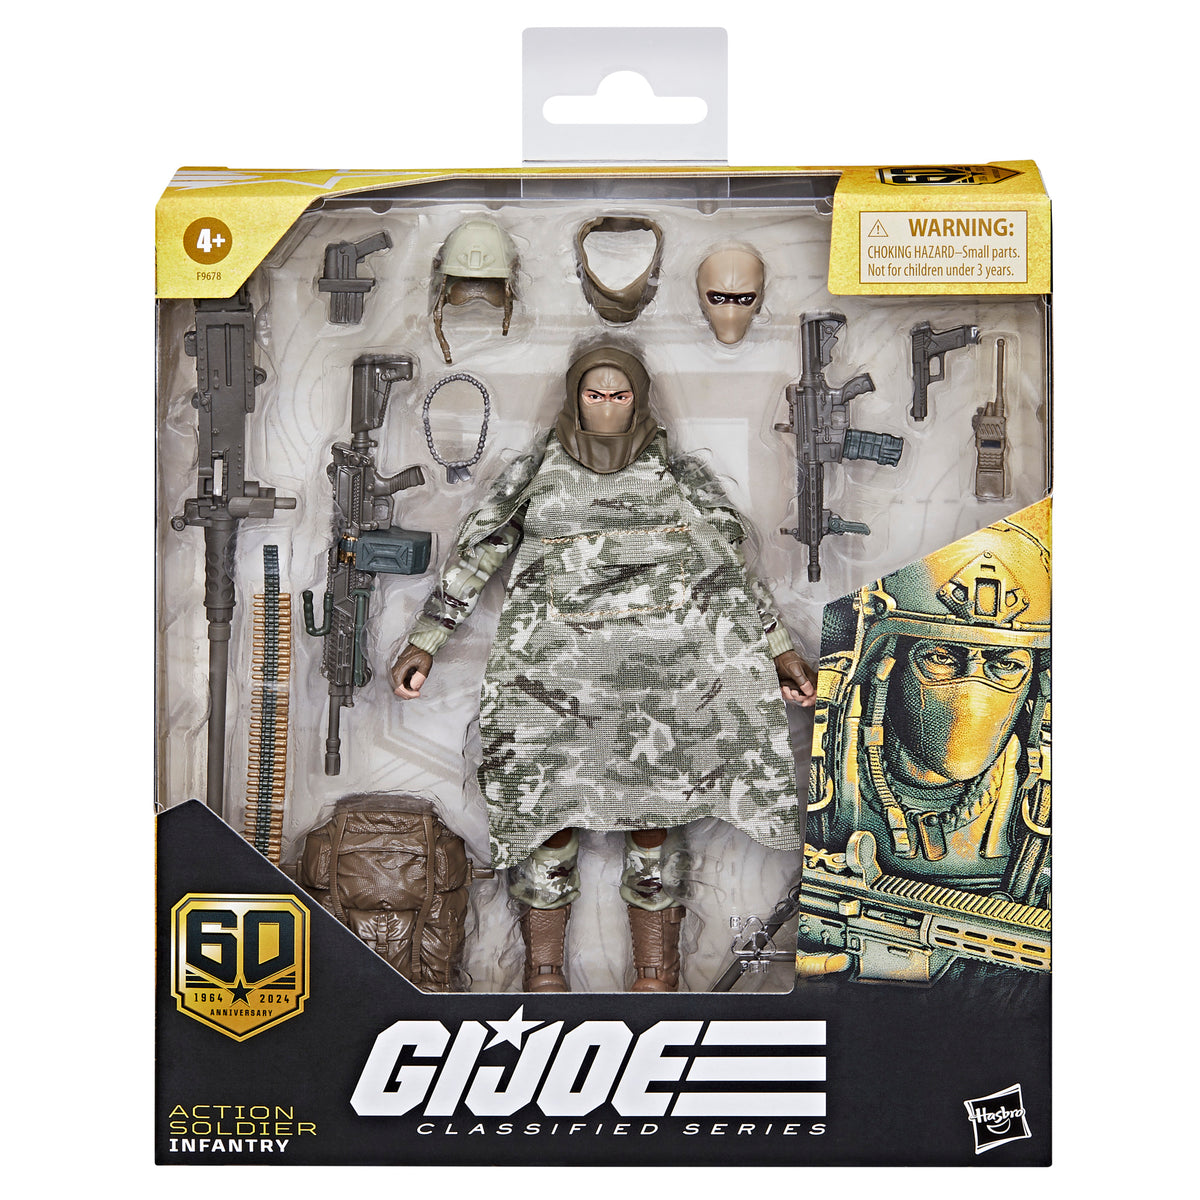 G.I. Joe Classified Series 60th Anniversary Action Soldier